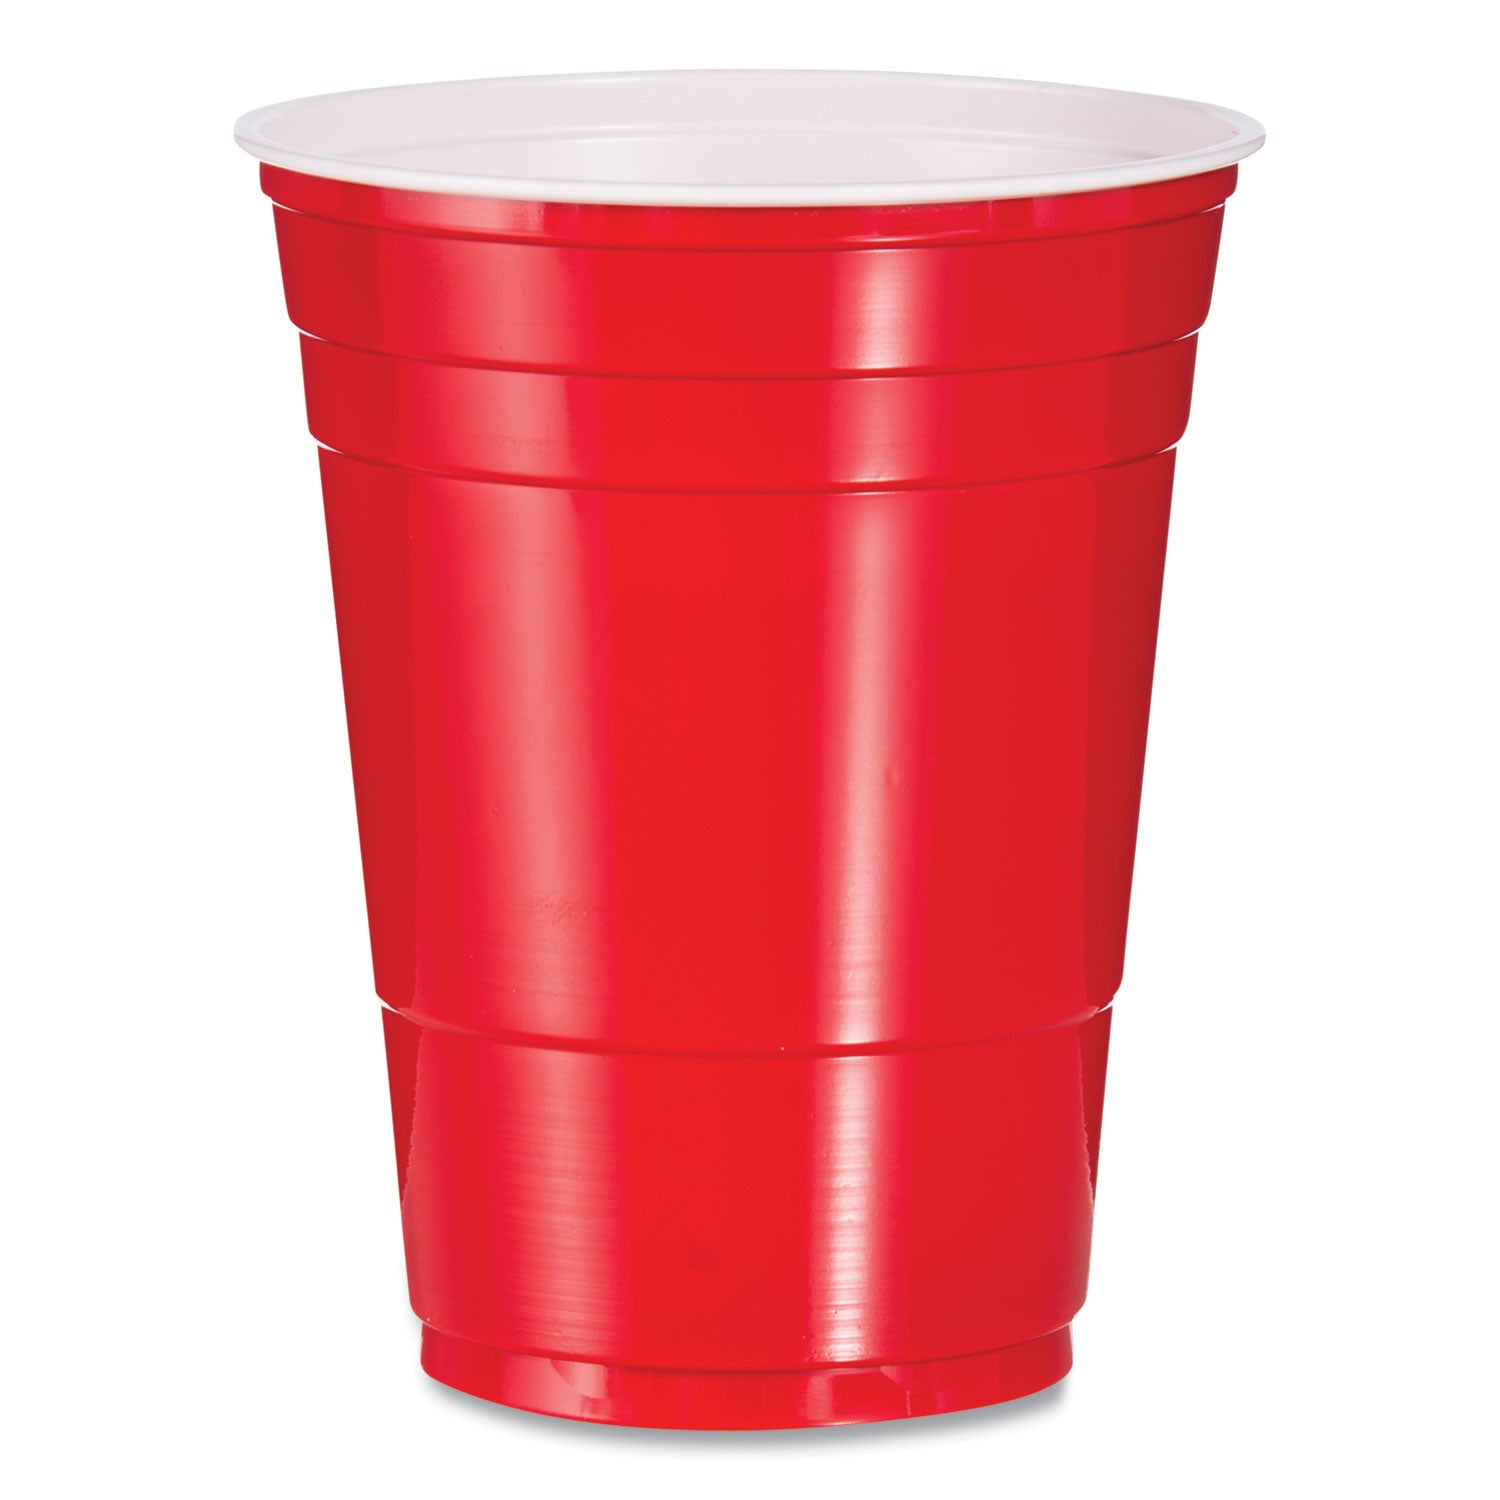 solo-party-plastic-cold-drink-cups-16-oz-red-288-carton_sccy16120001 - 4